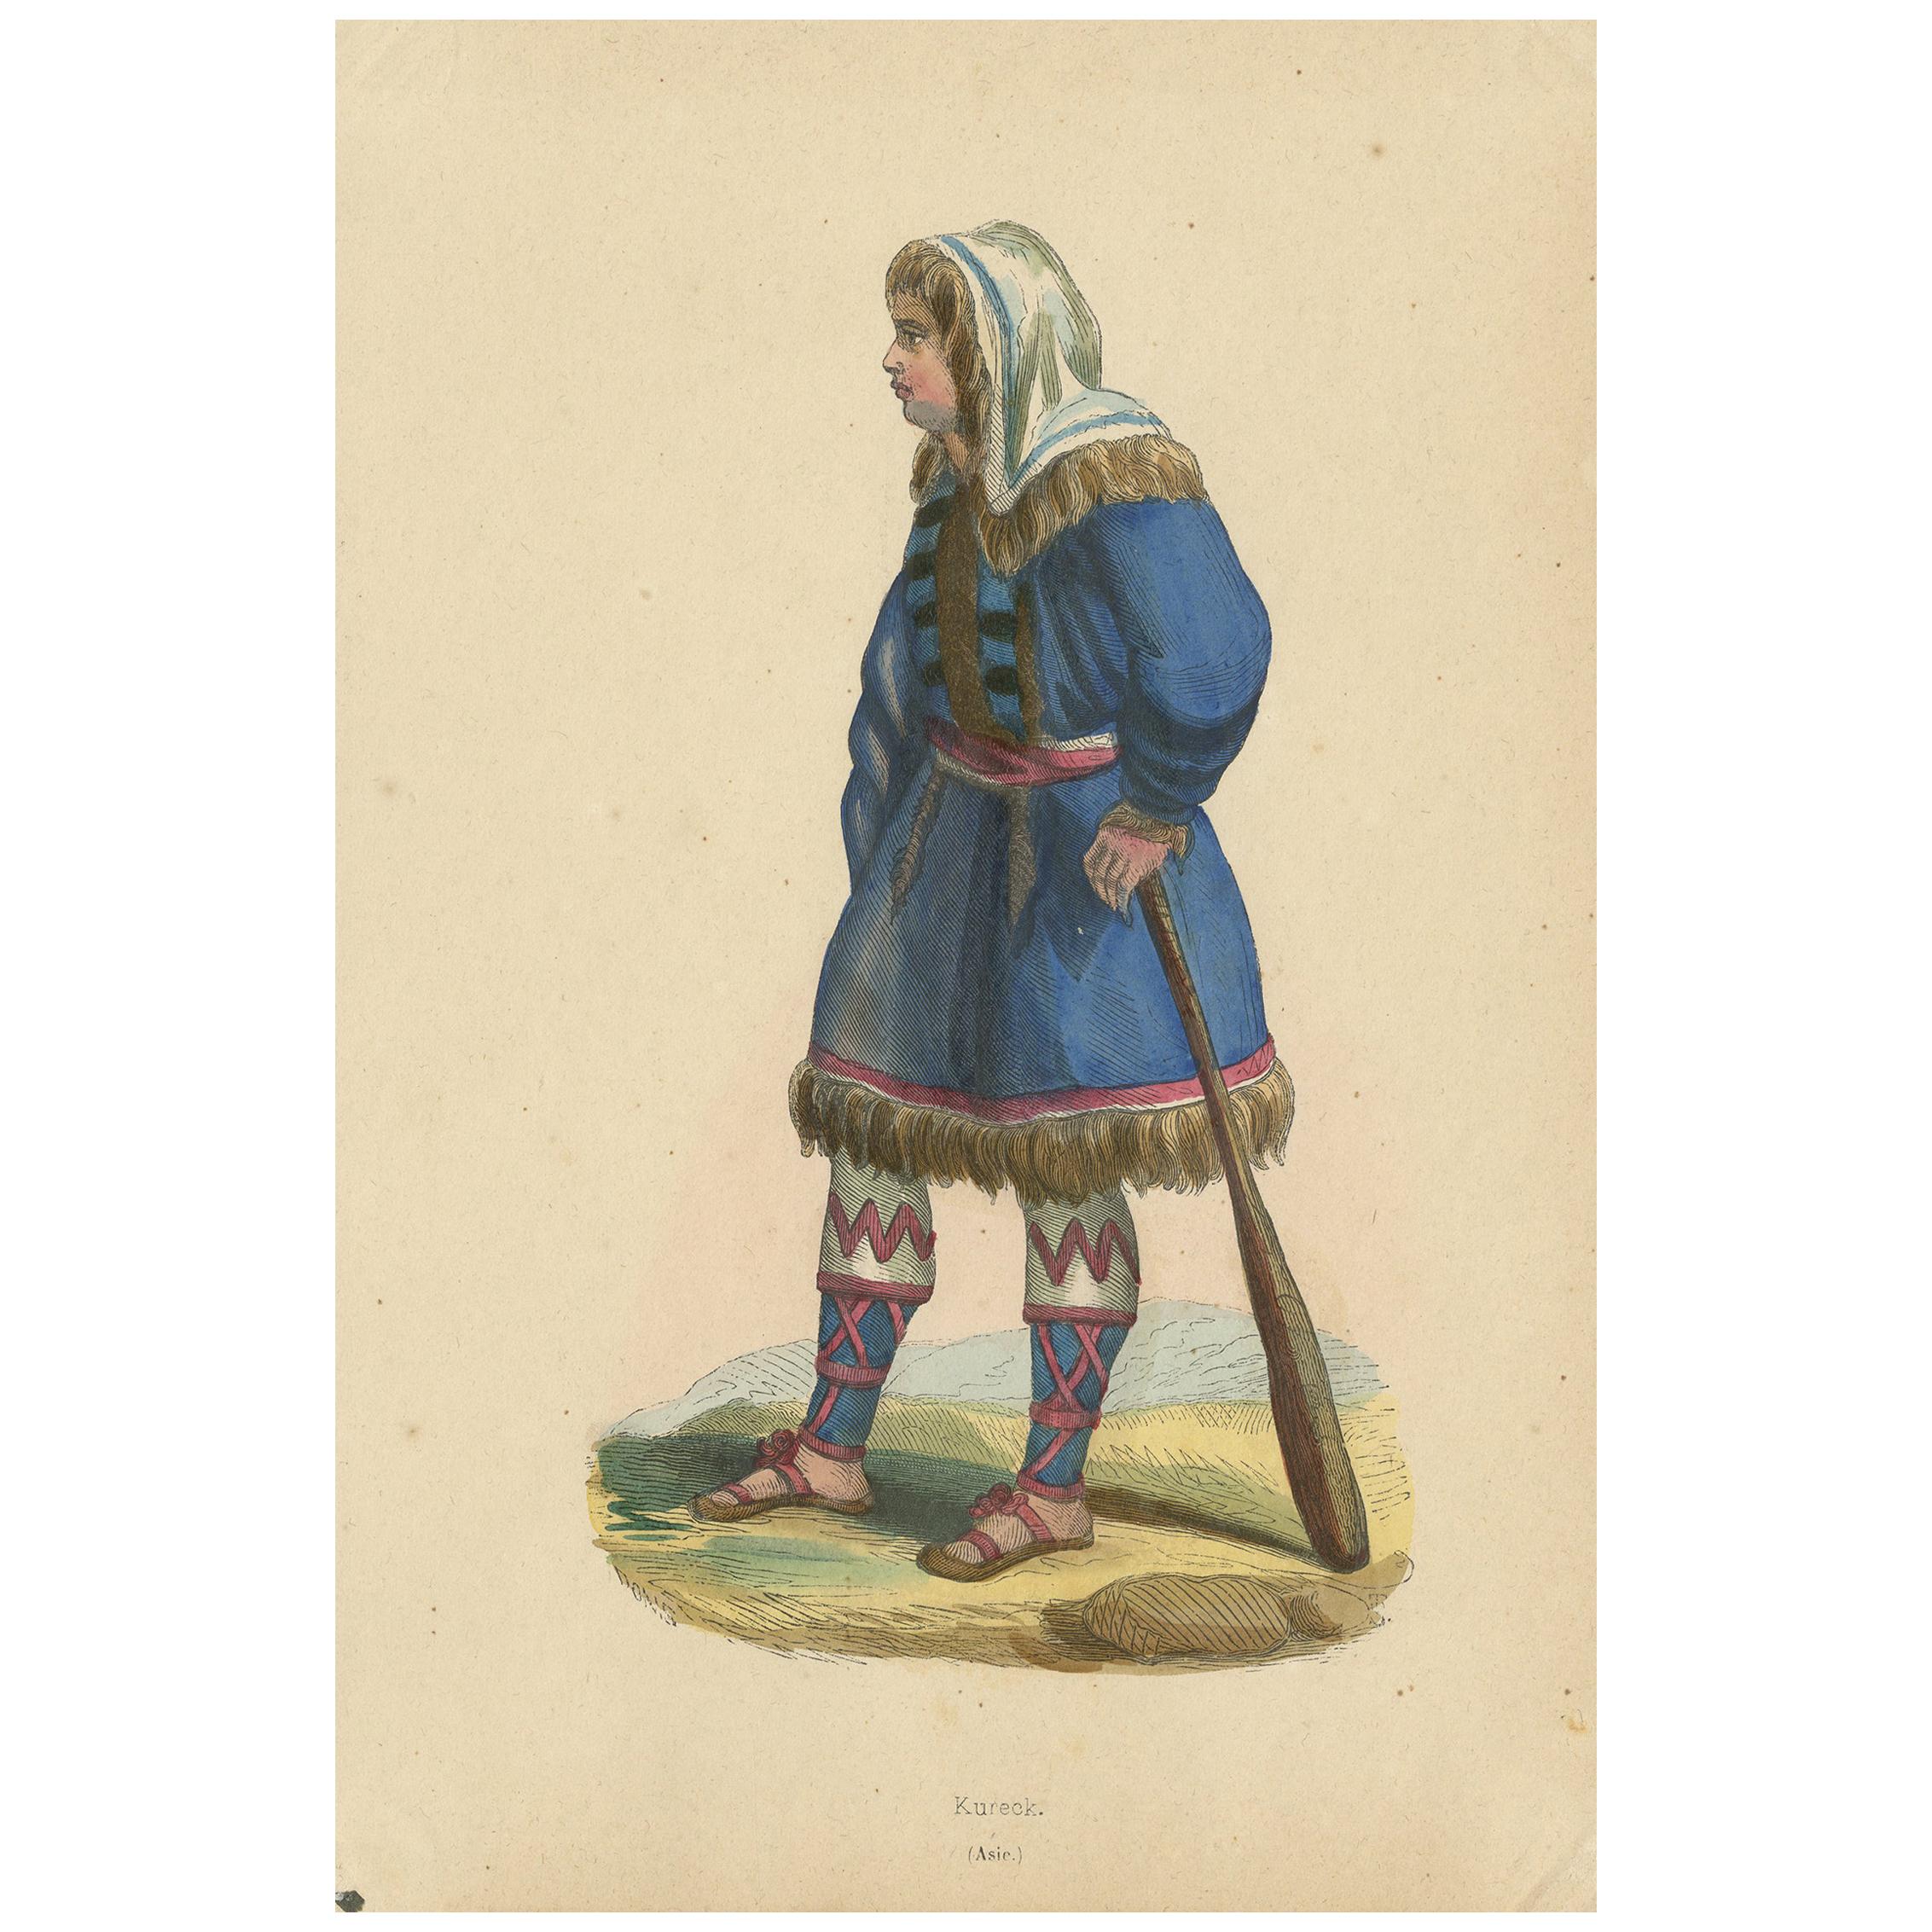 Antique Costume Print of a Kureck Woman by Wahlen, 1843